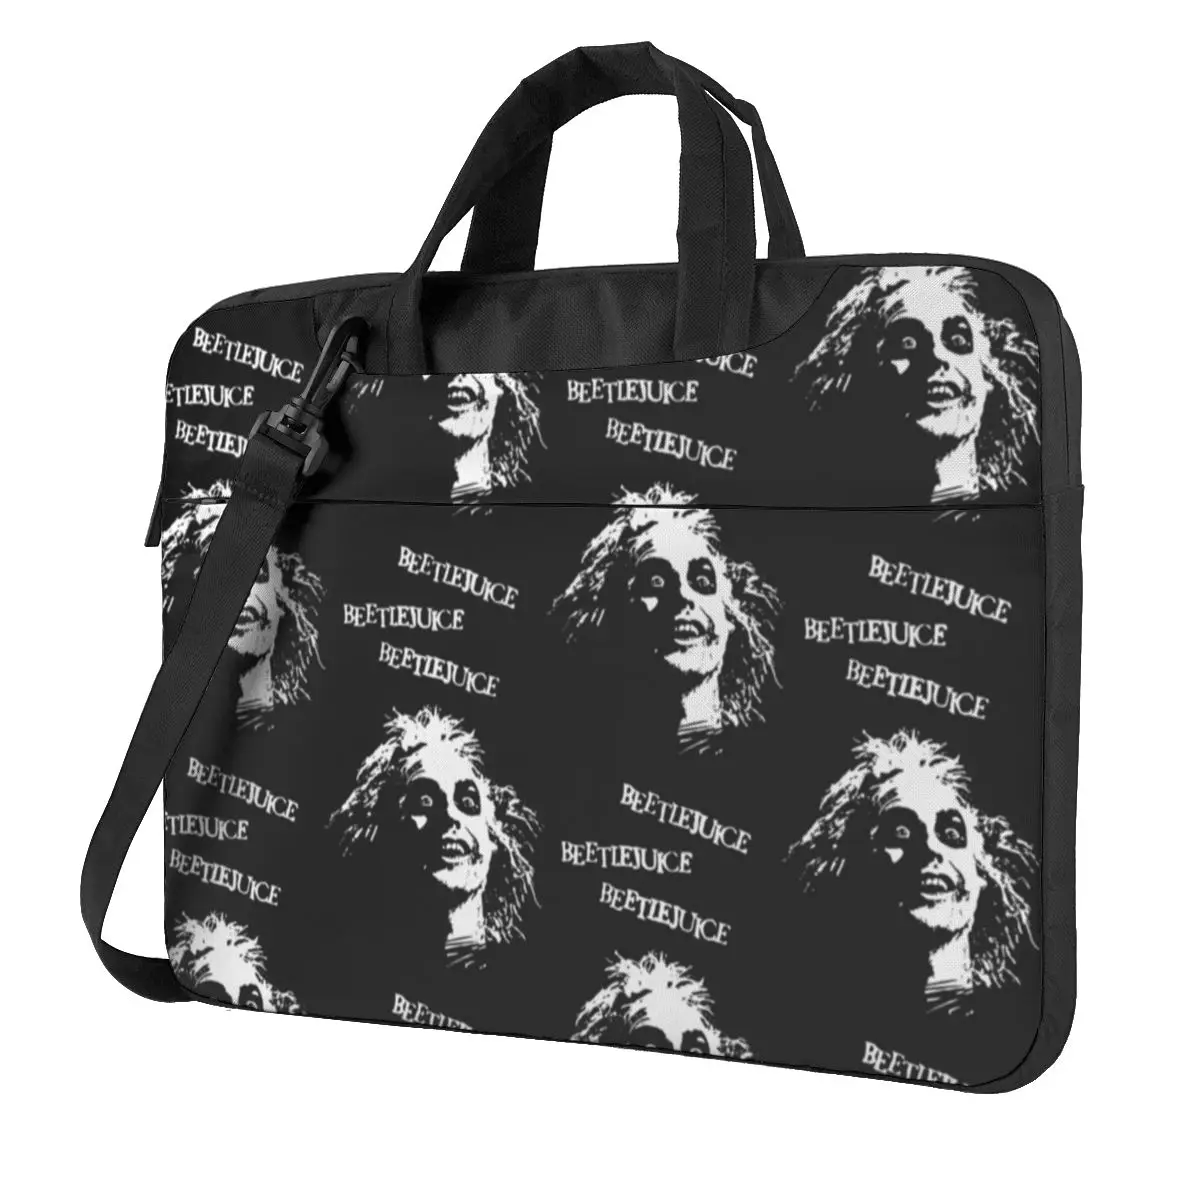 

Beetlejuice Laptop Bag Case Horror Cult Film Travelmate With Handle Computer Bag Protective Fashion Laptop Pouch